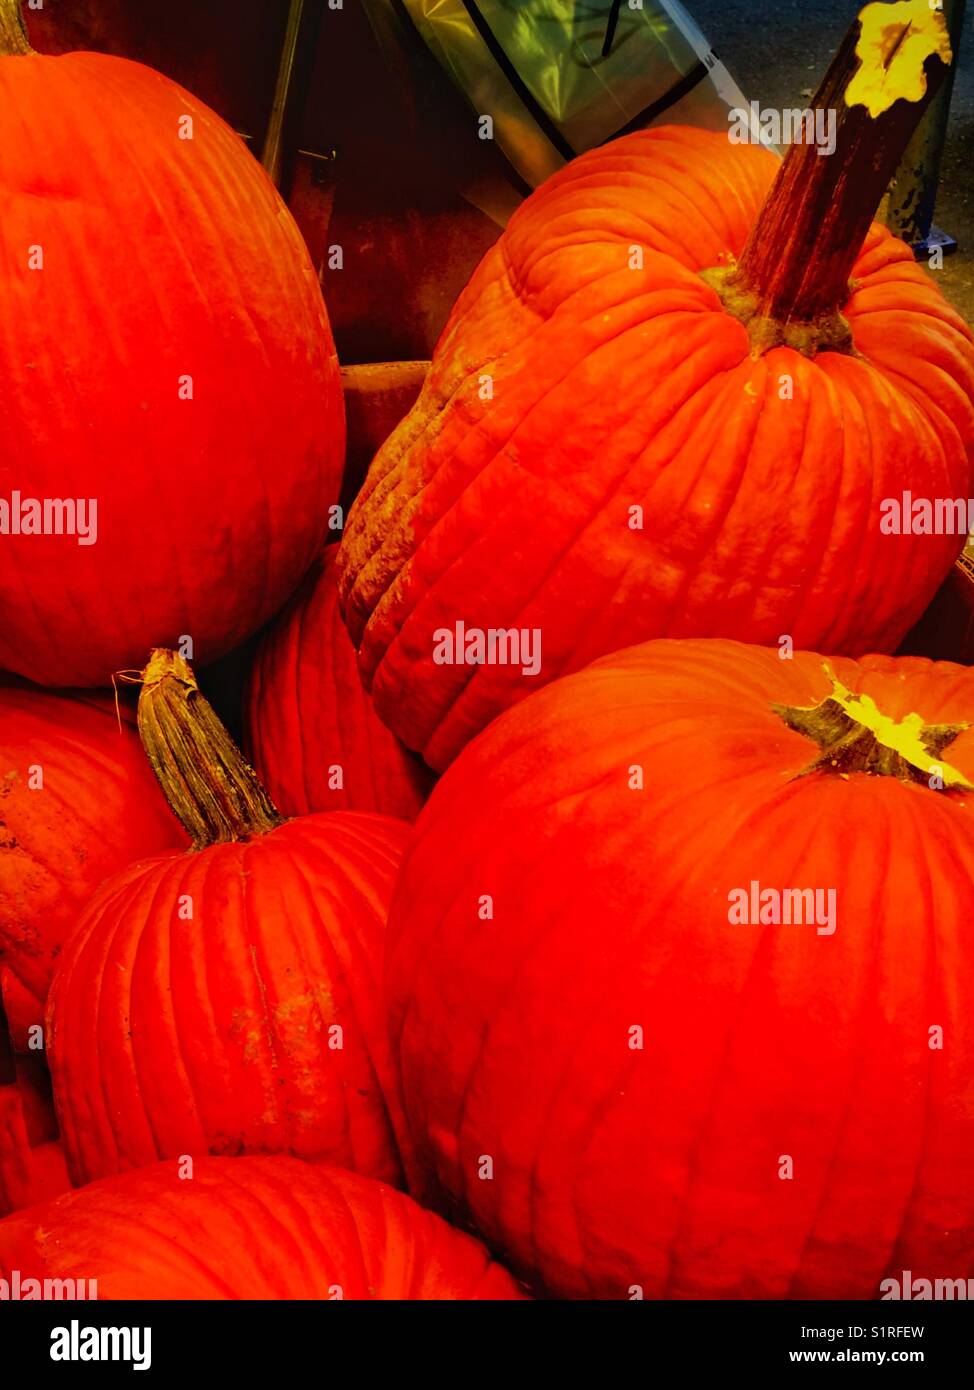 Imperfect Pumpkins looking for the Perfect  Home Stock Photo